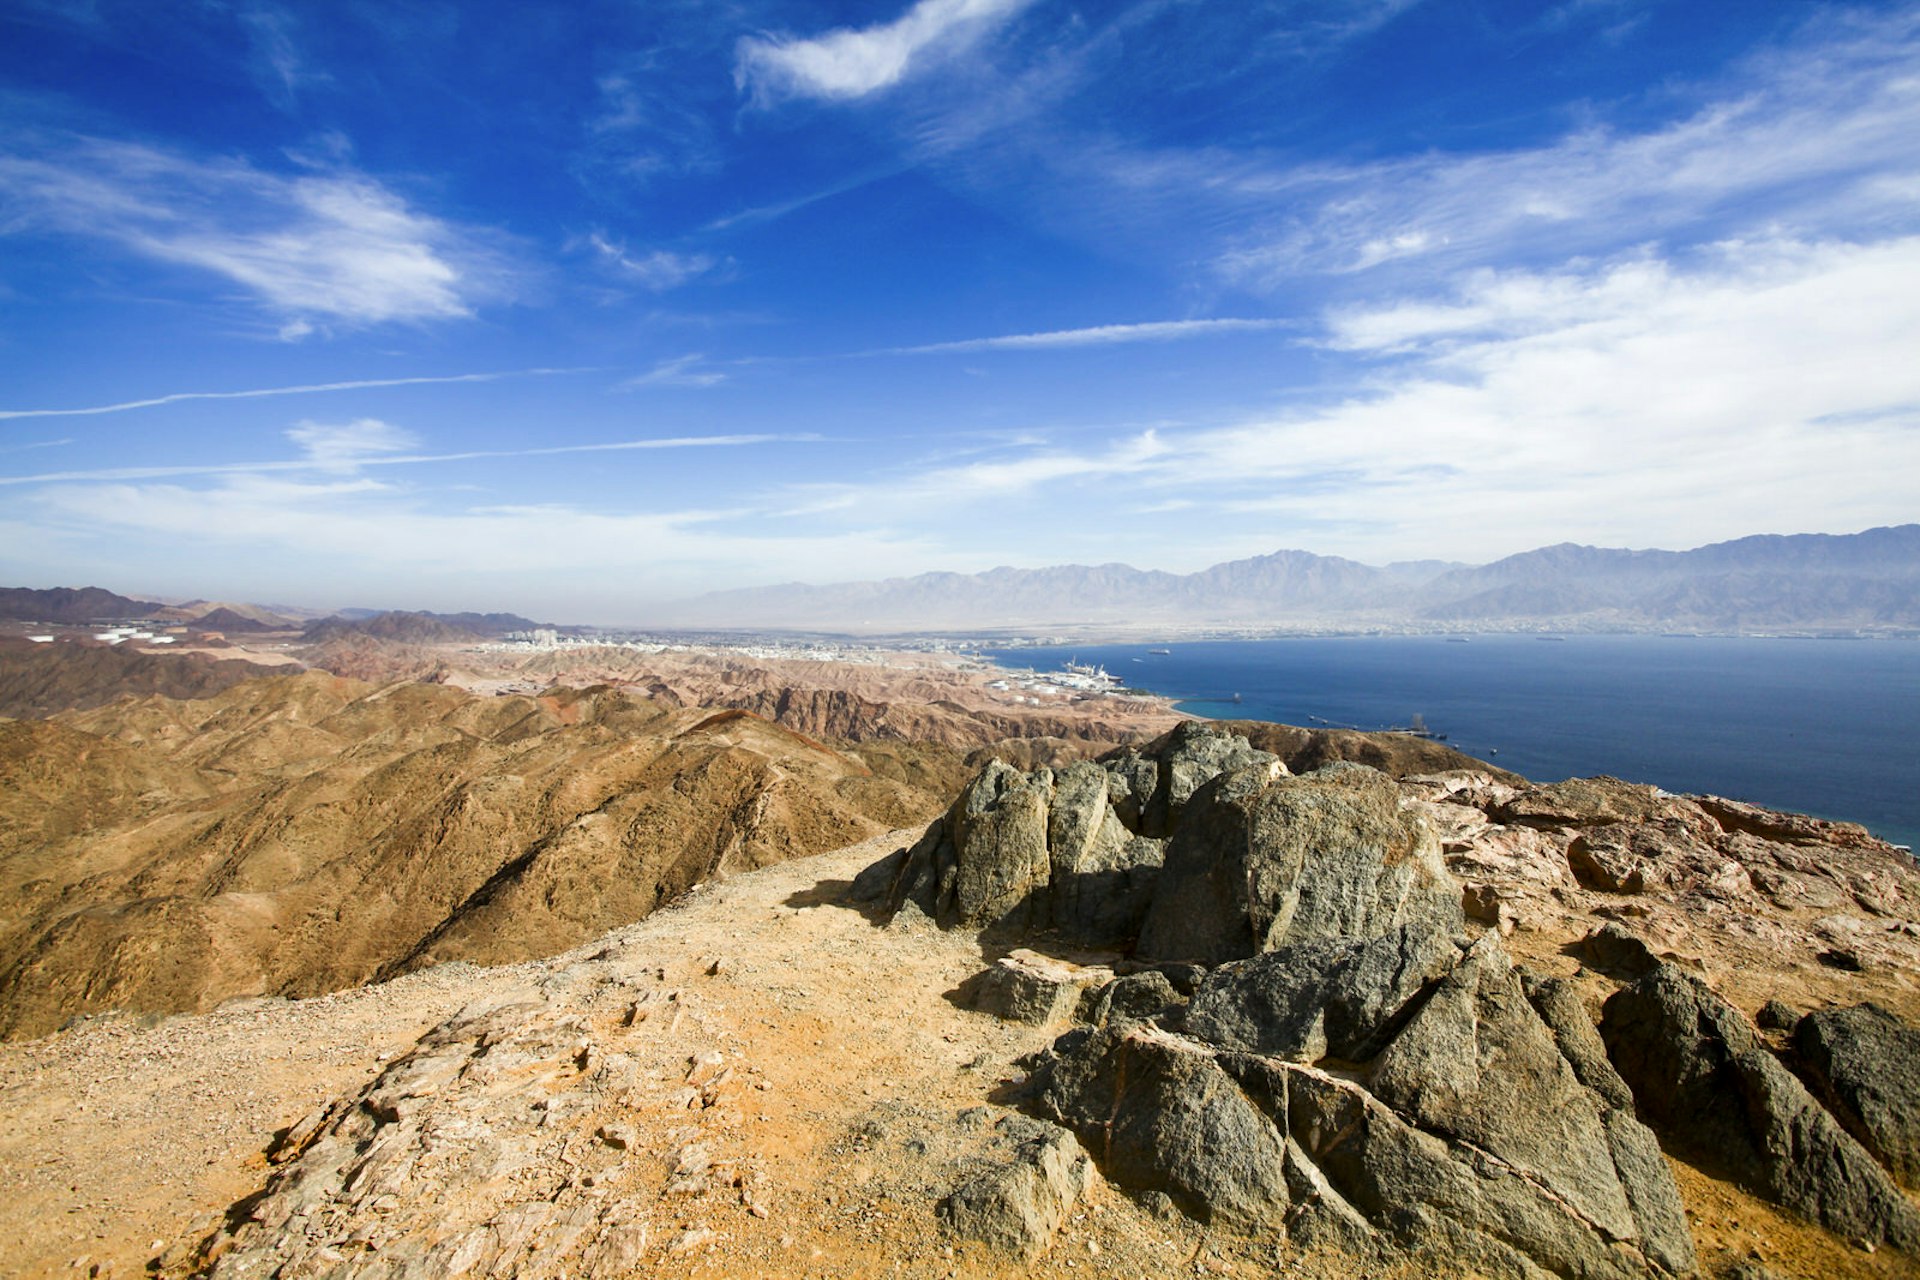 Eilat Mountain range overlooking the Red Sea. Image by PhotoStock-Israel / Getty